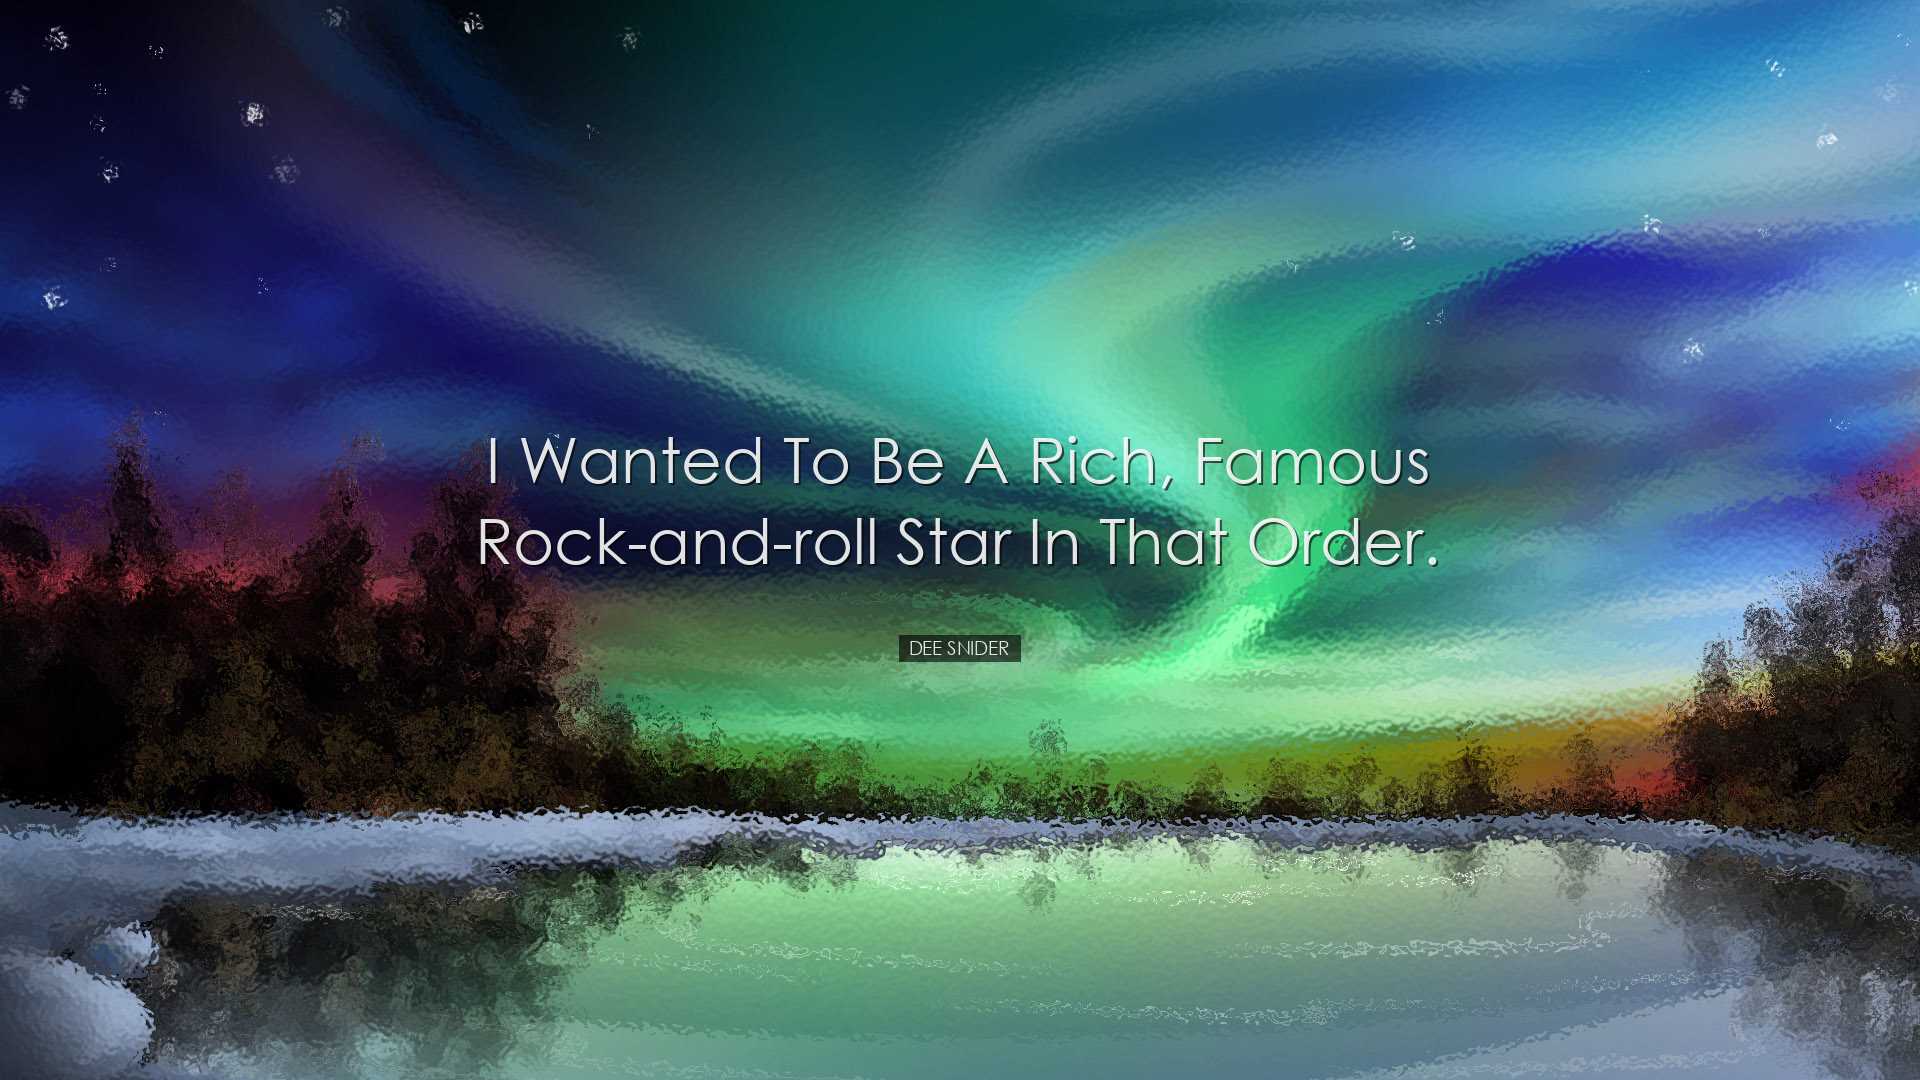 I wanted to be a rich, famous rock-and-roll star in that order. -